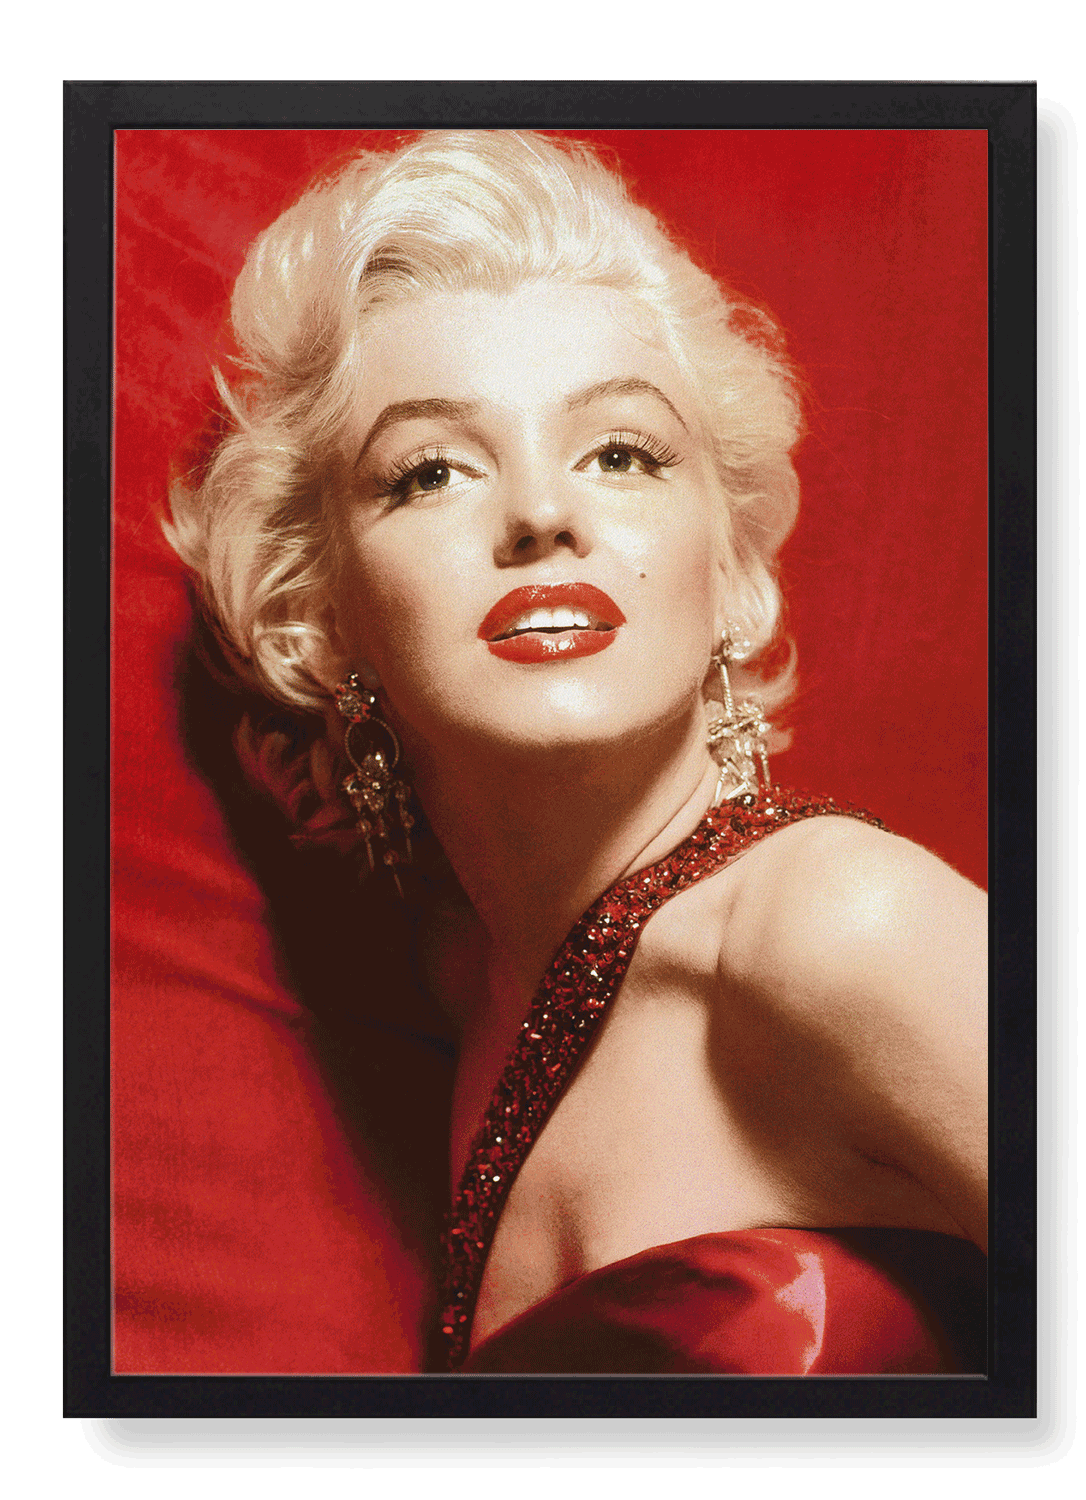 MONROE IN A RED DRESS